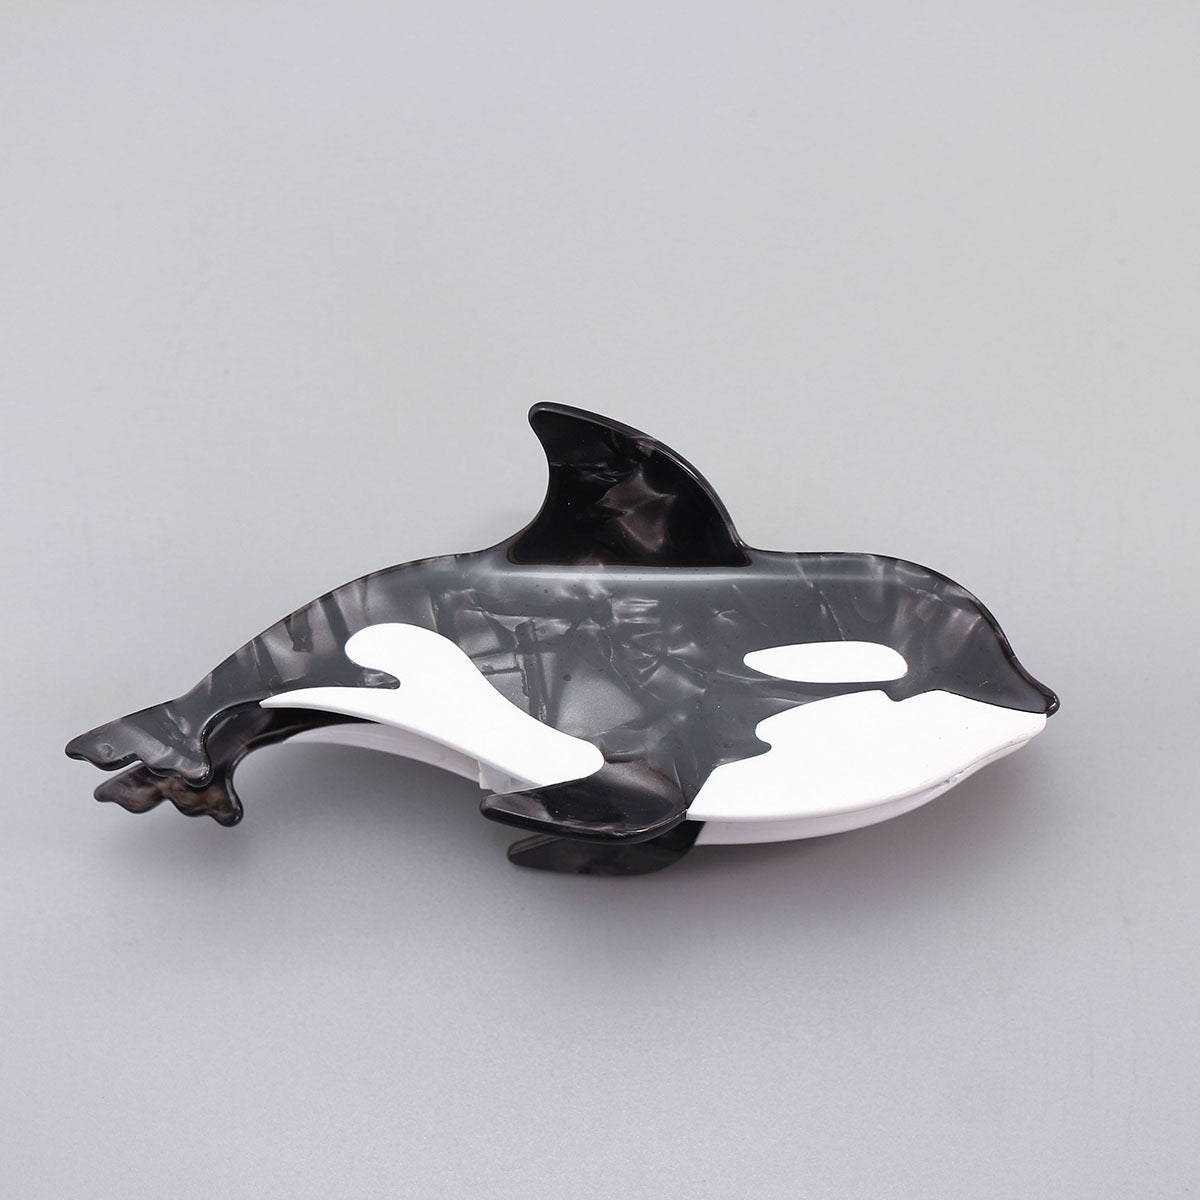 Orca claw in black